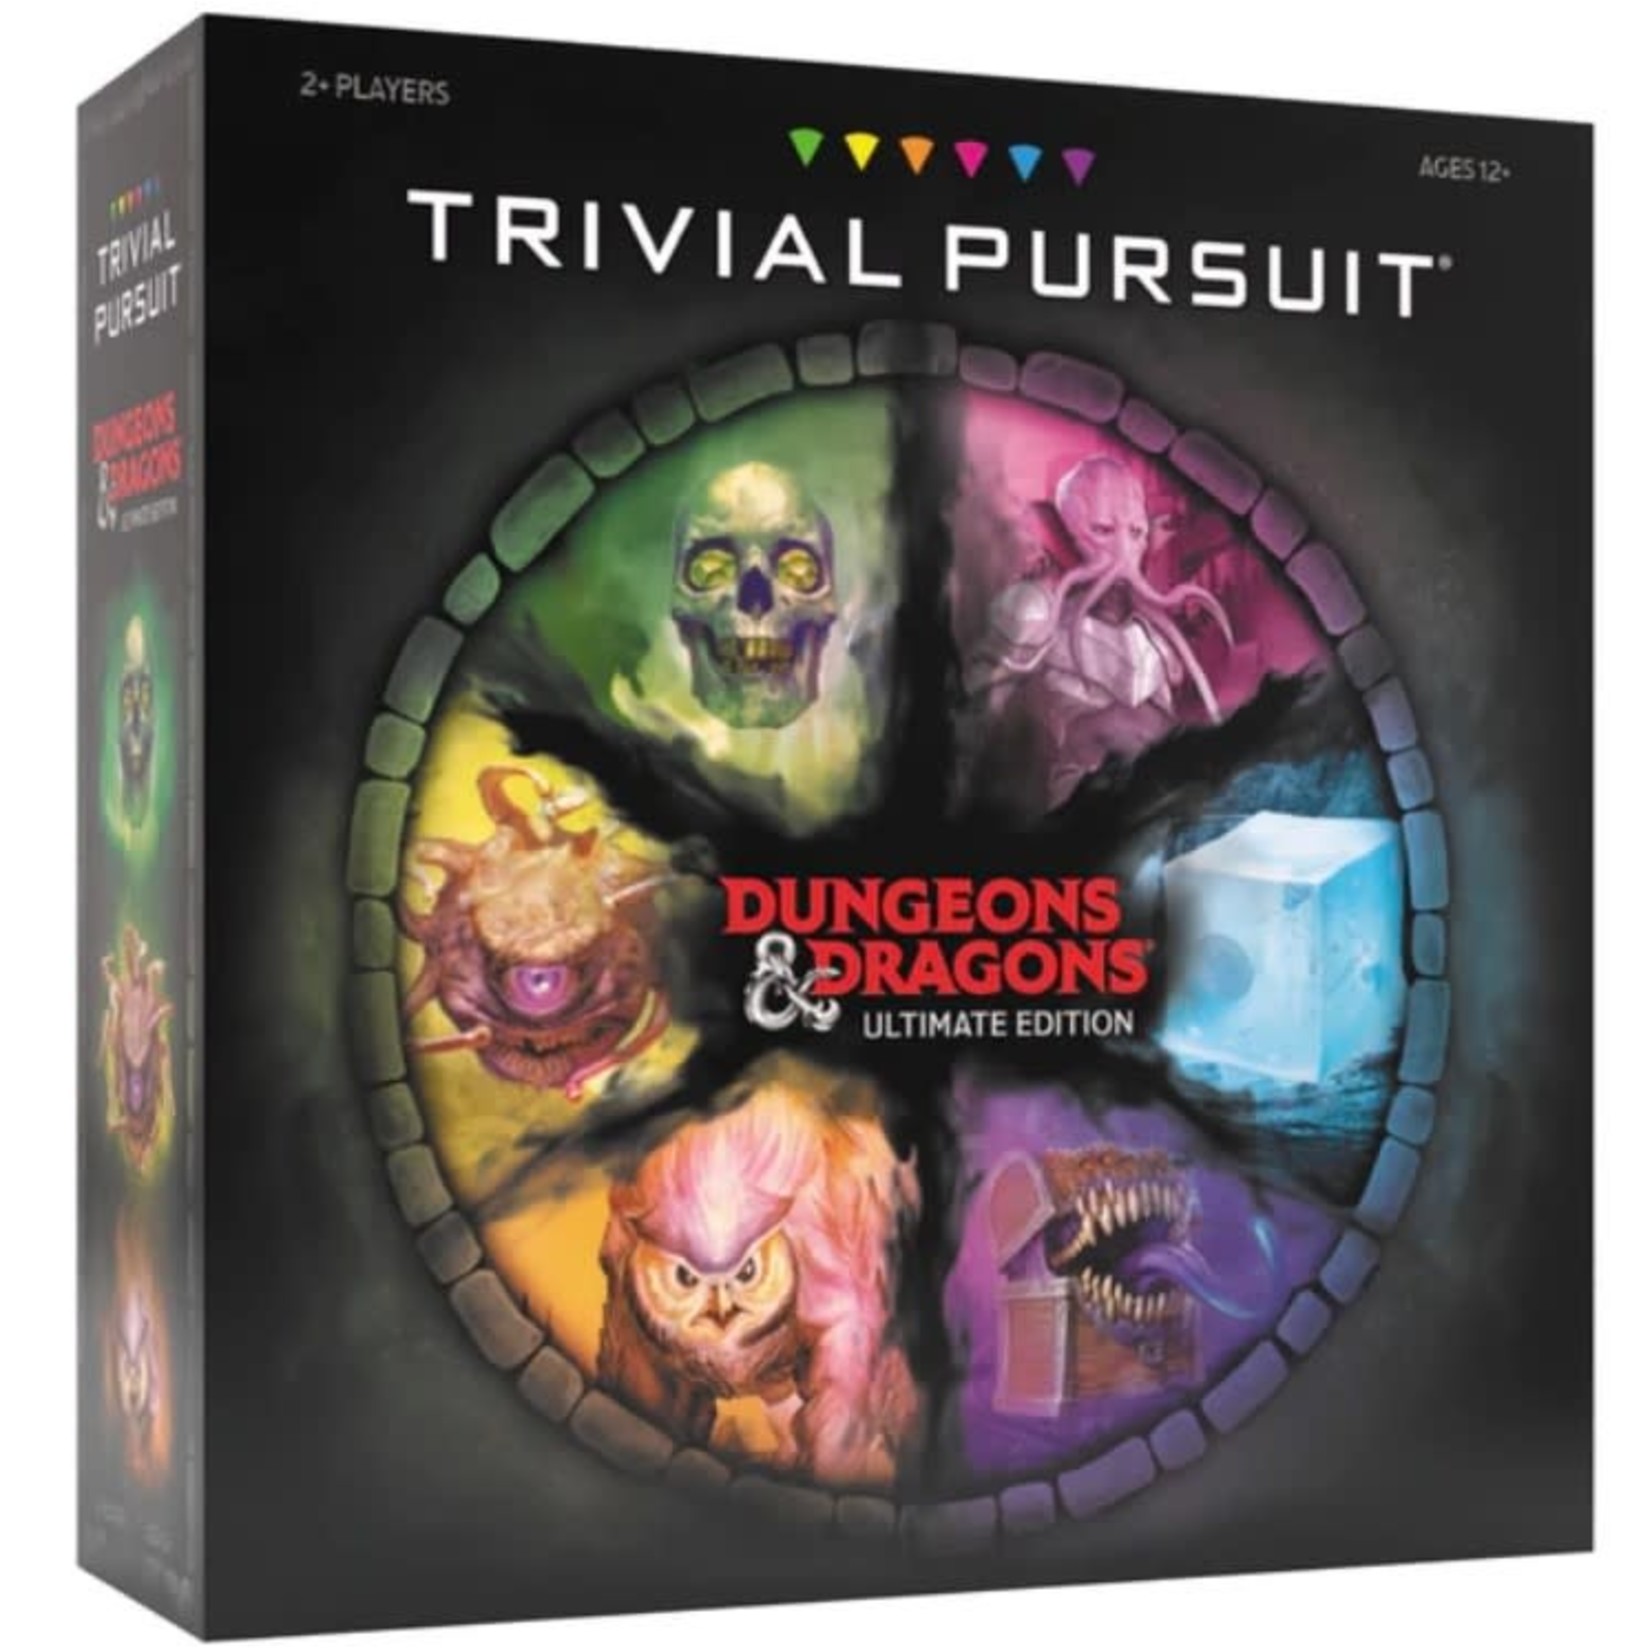 The OP-USAopoly Trivial Pursuit: Dungeons & Dragons Ultimate Edition